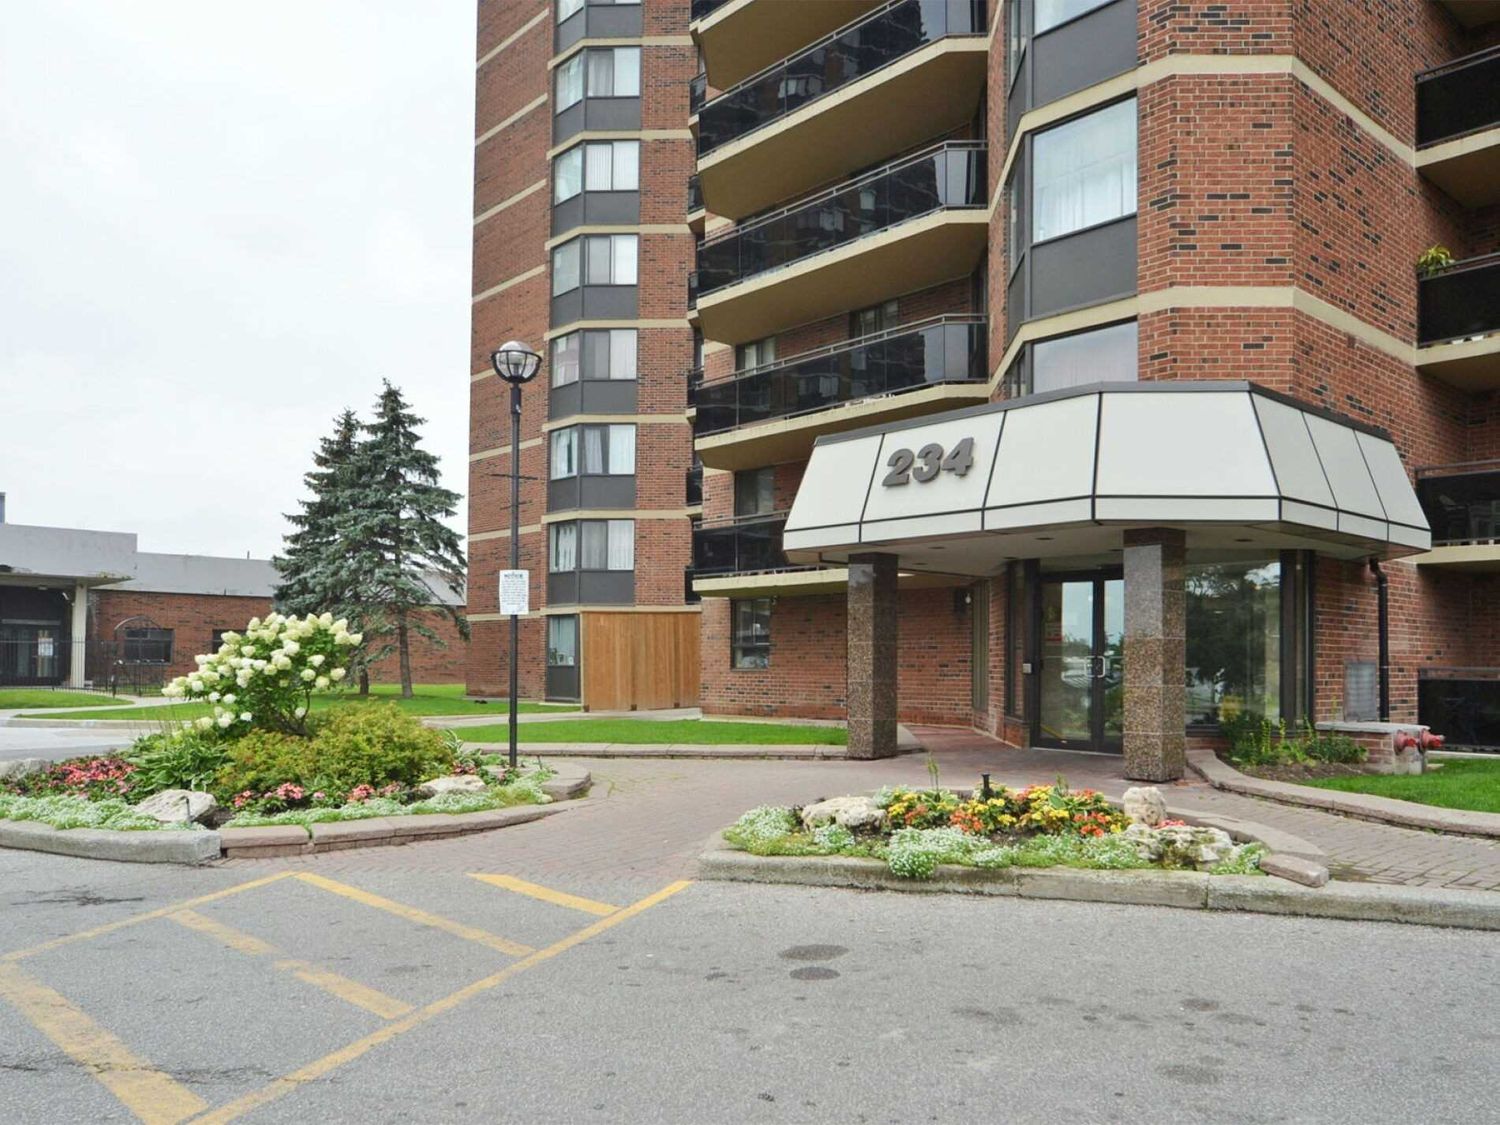 234 Albion Road. Twin Towers Condos is located in  Etobicoke, Toronto - image #2 of 3